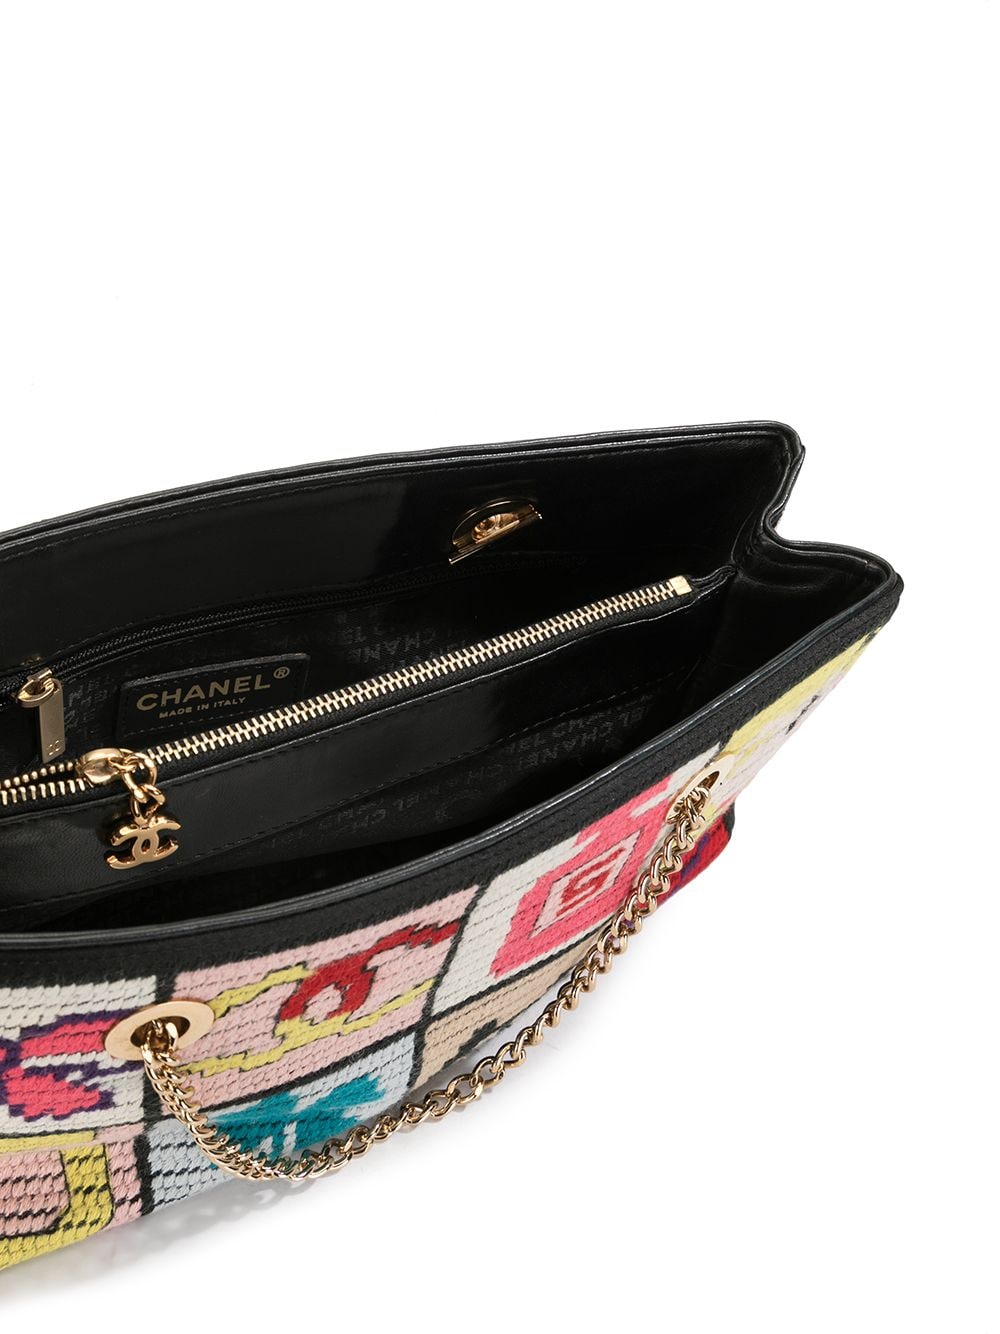 CHANEL needlepoint lucky charms patchwork pochette bag with gilt